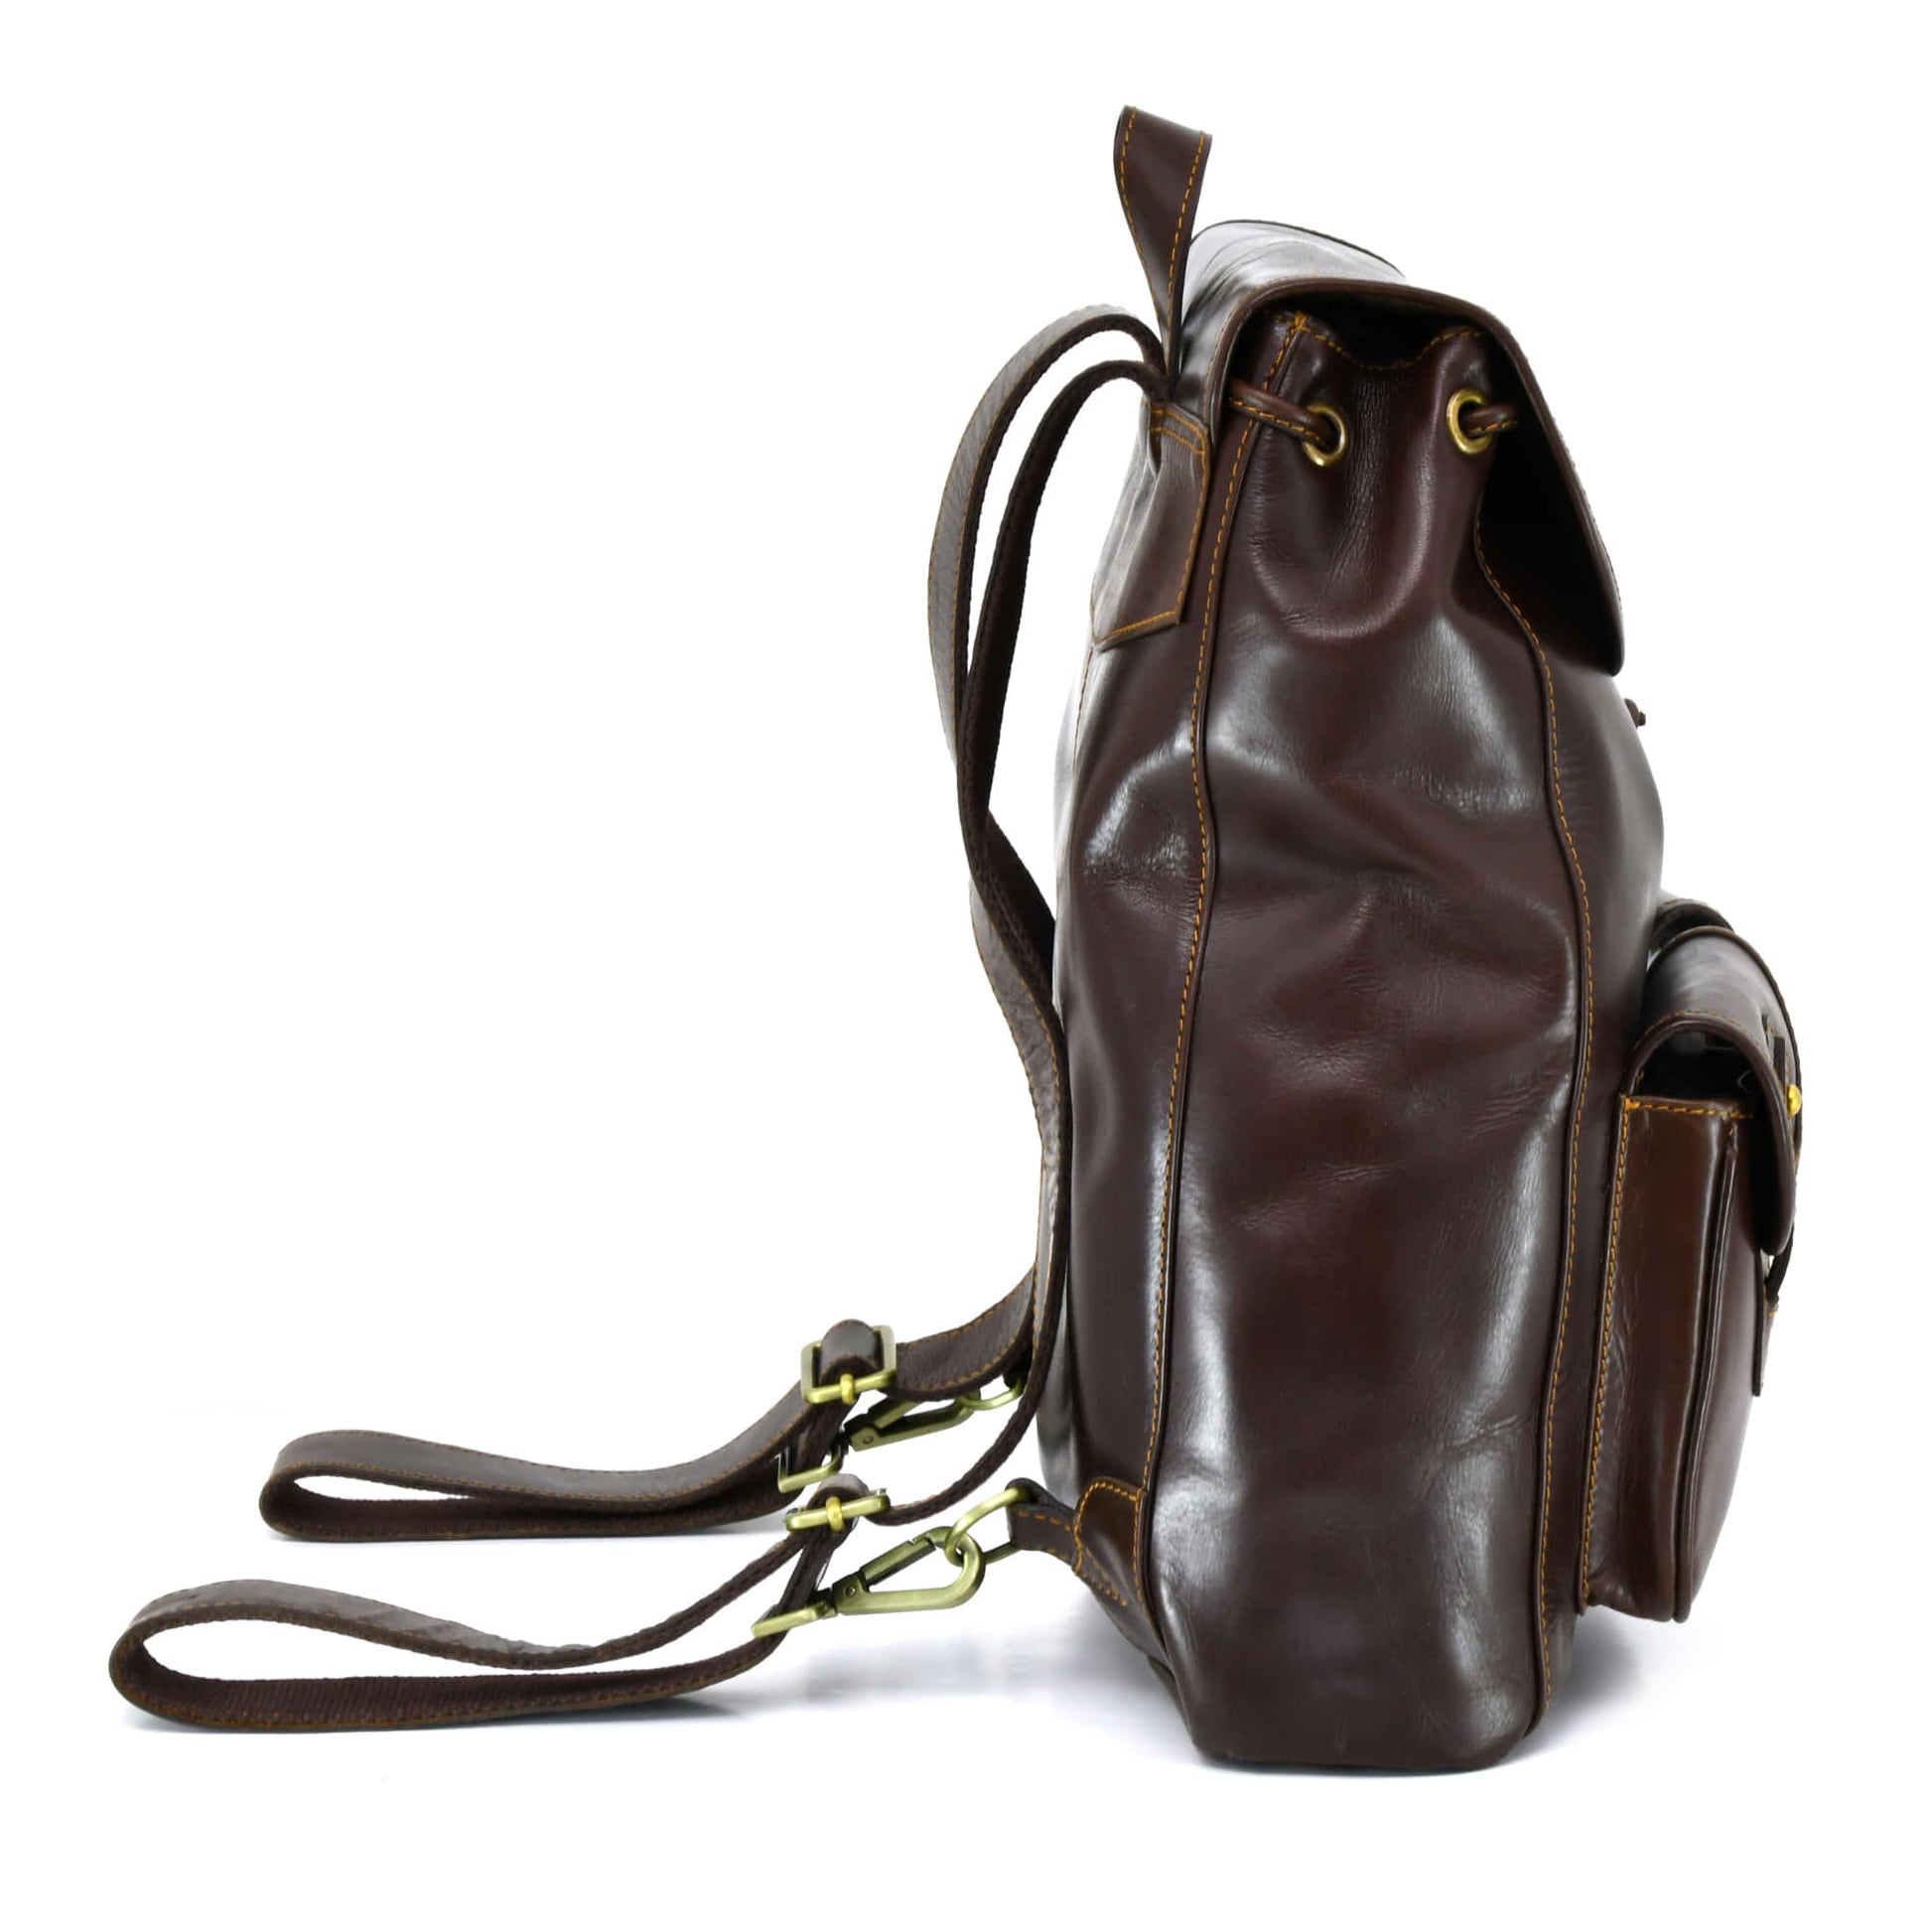 Style n Craft 392151 Backpack in Full Grain Dark Brown Leather, Medium Size - Side View Showing Adjustable Leather Shoulder Straps, 1 Front Pocket & Leather Hand Carry Strap